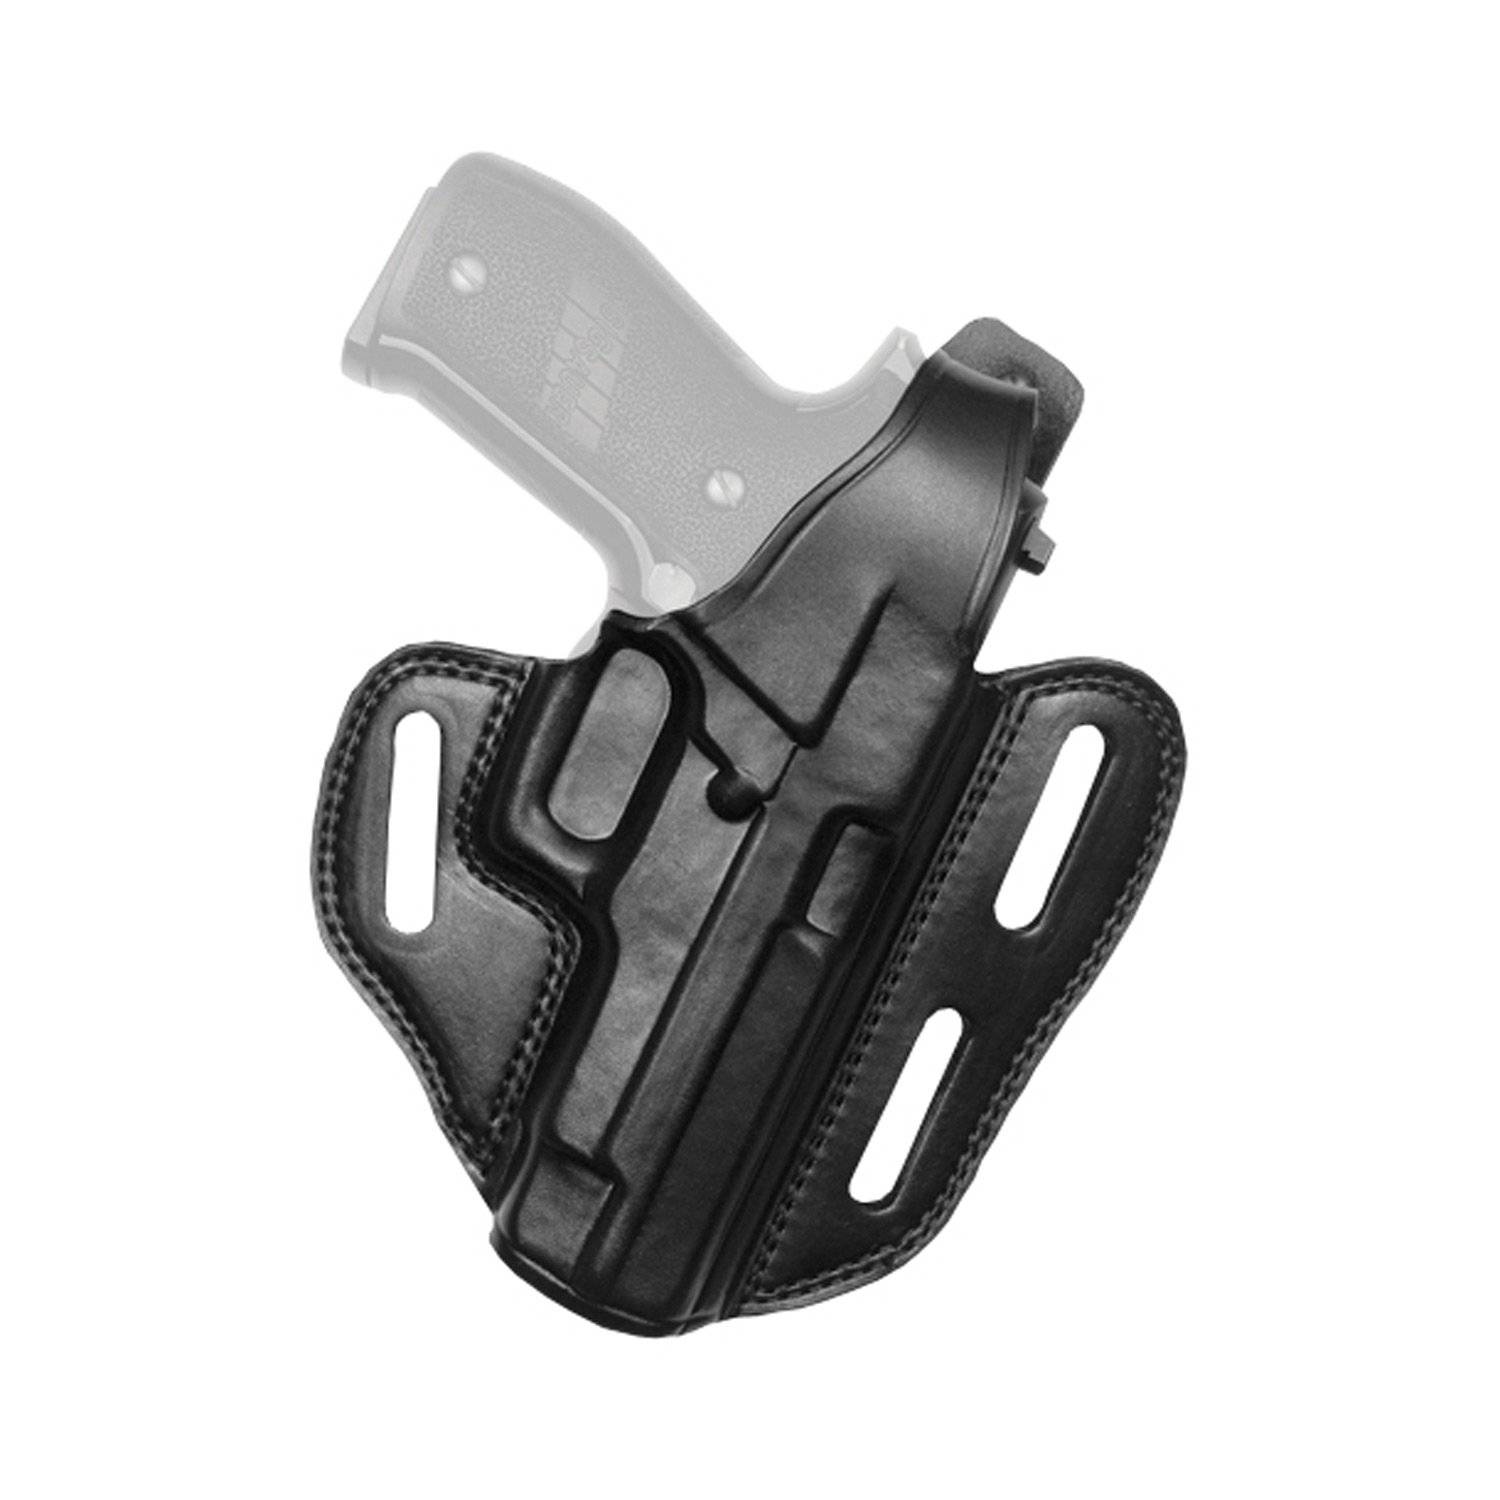 Details about   GOULD & GOODRICH GOLD LINE 2 SLOT PANCAKE HOLSTER FOR SIG SAUER P250 SUB COMPACT